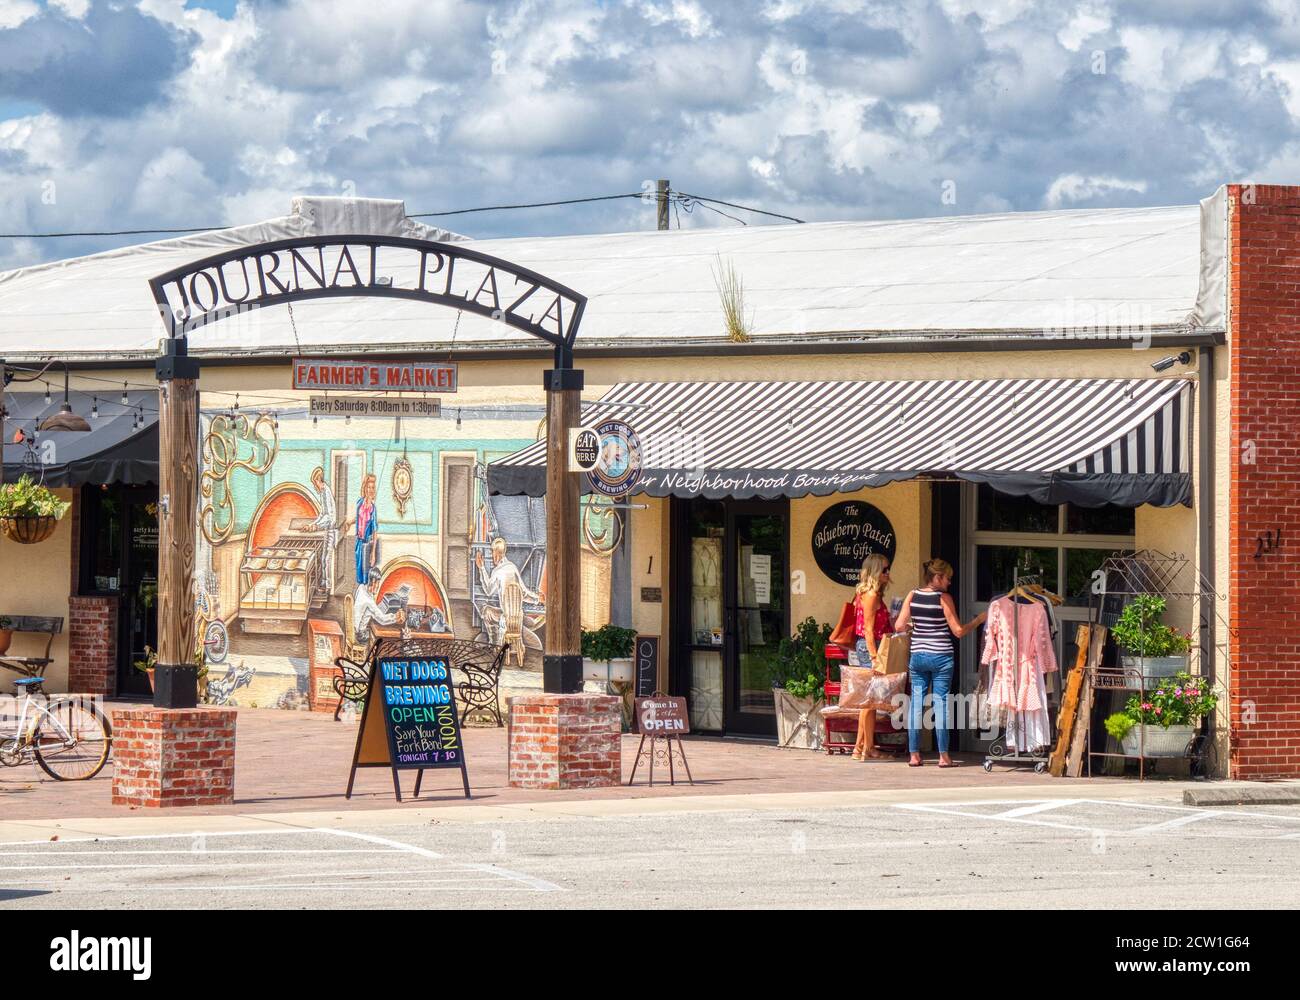 Journal Plaza in Lake Placid in Florida in the United States Stock Photo